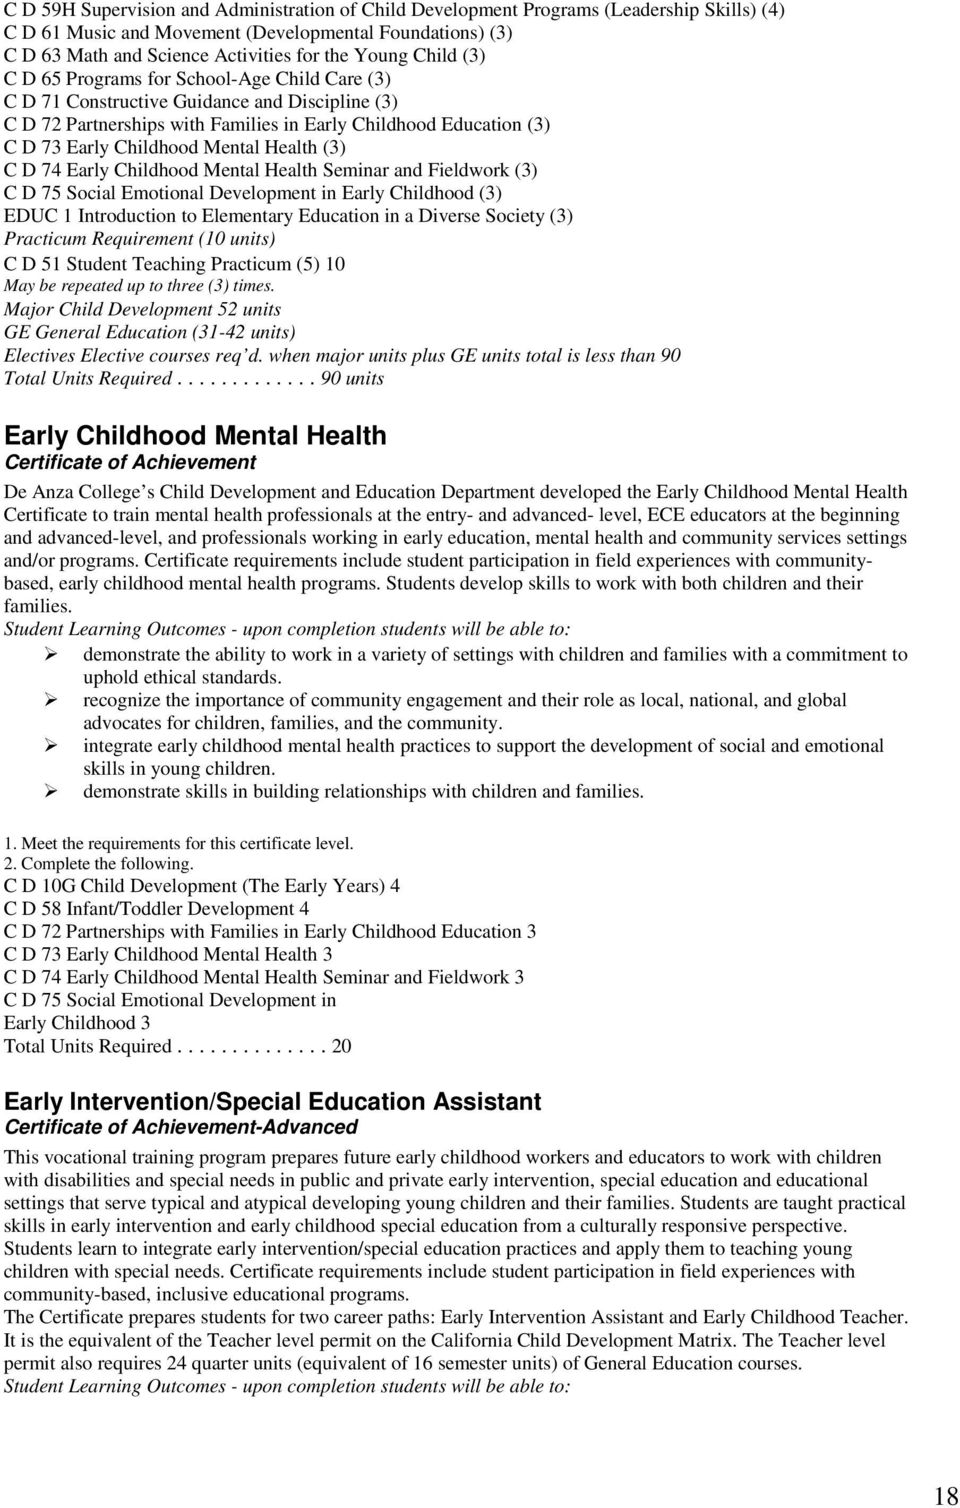 Mental Health (3) C D 74 Early Childhood Mental Health Seminar and Fieldwork (3) C D 75 Social Emotional Development in Early Childhood (3) EDUC 1 Introduction to Elementary Education in a Diverse